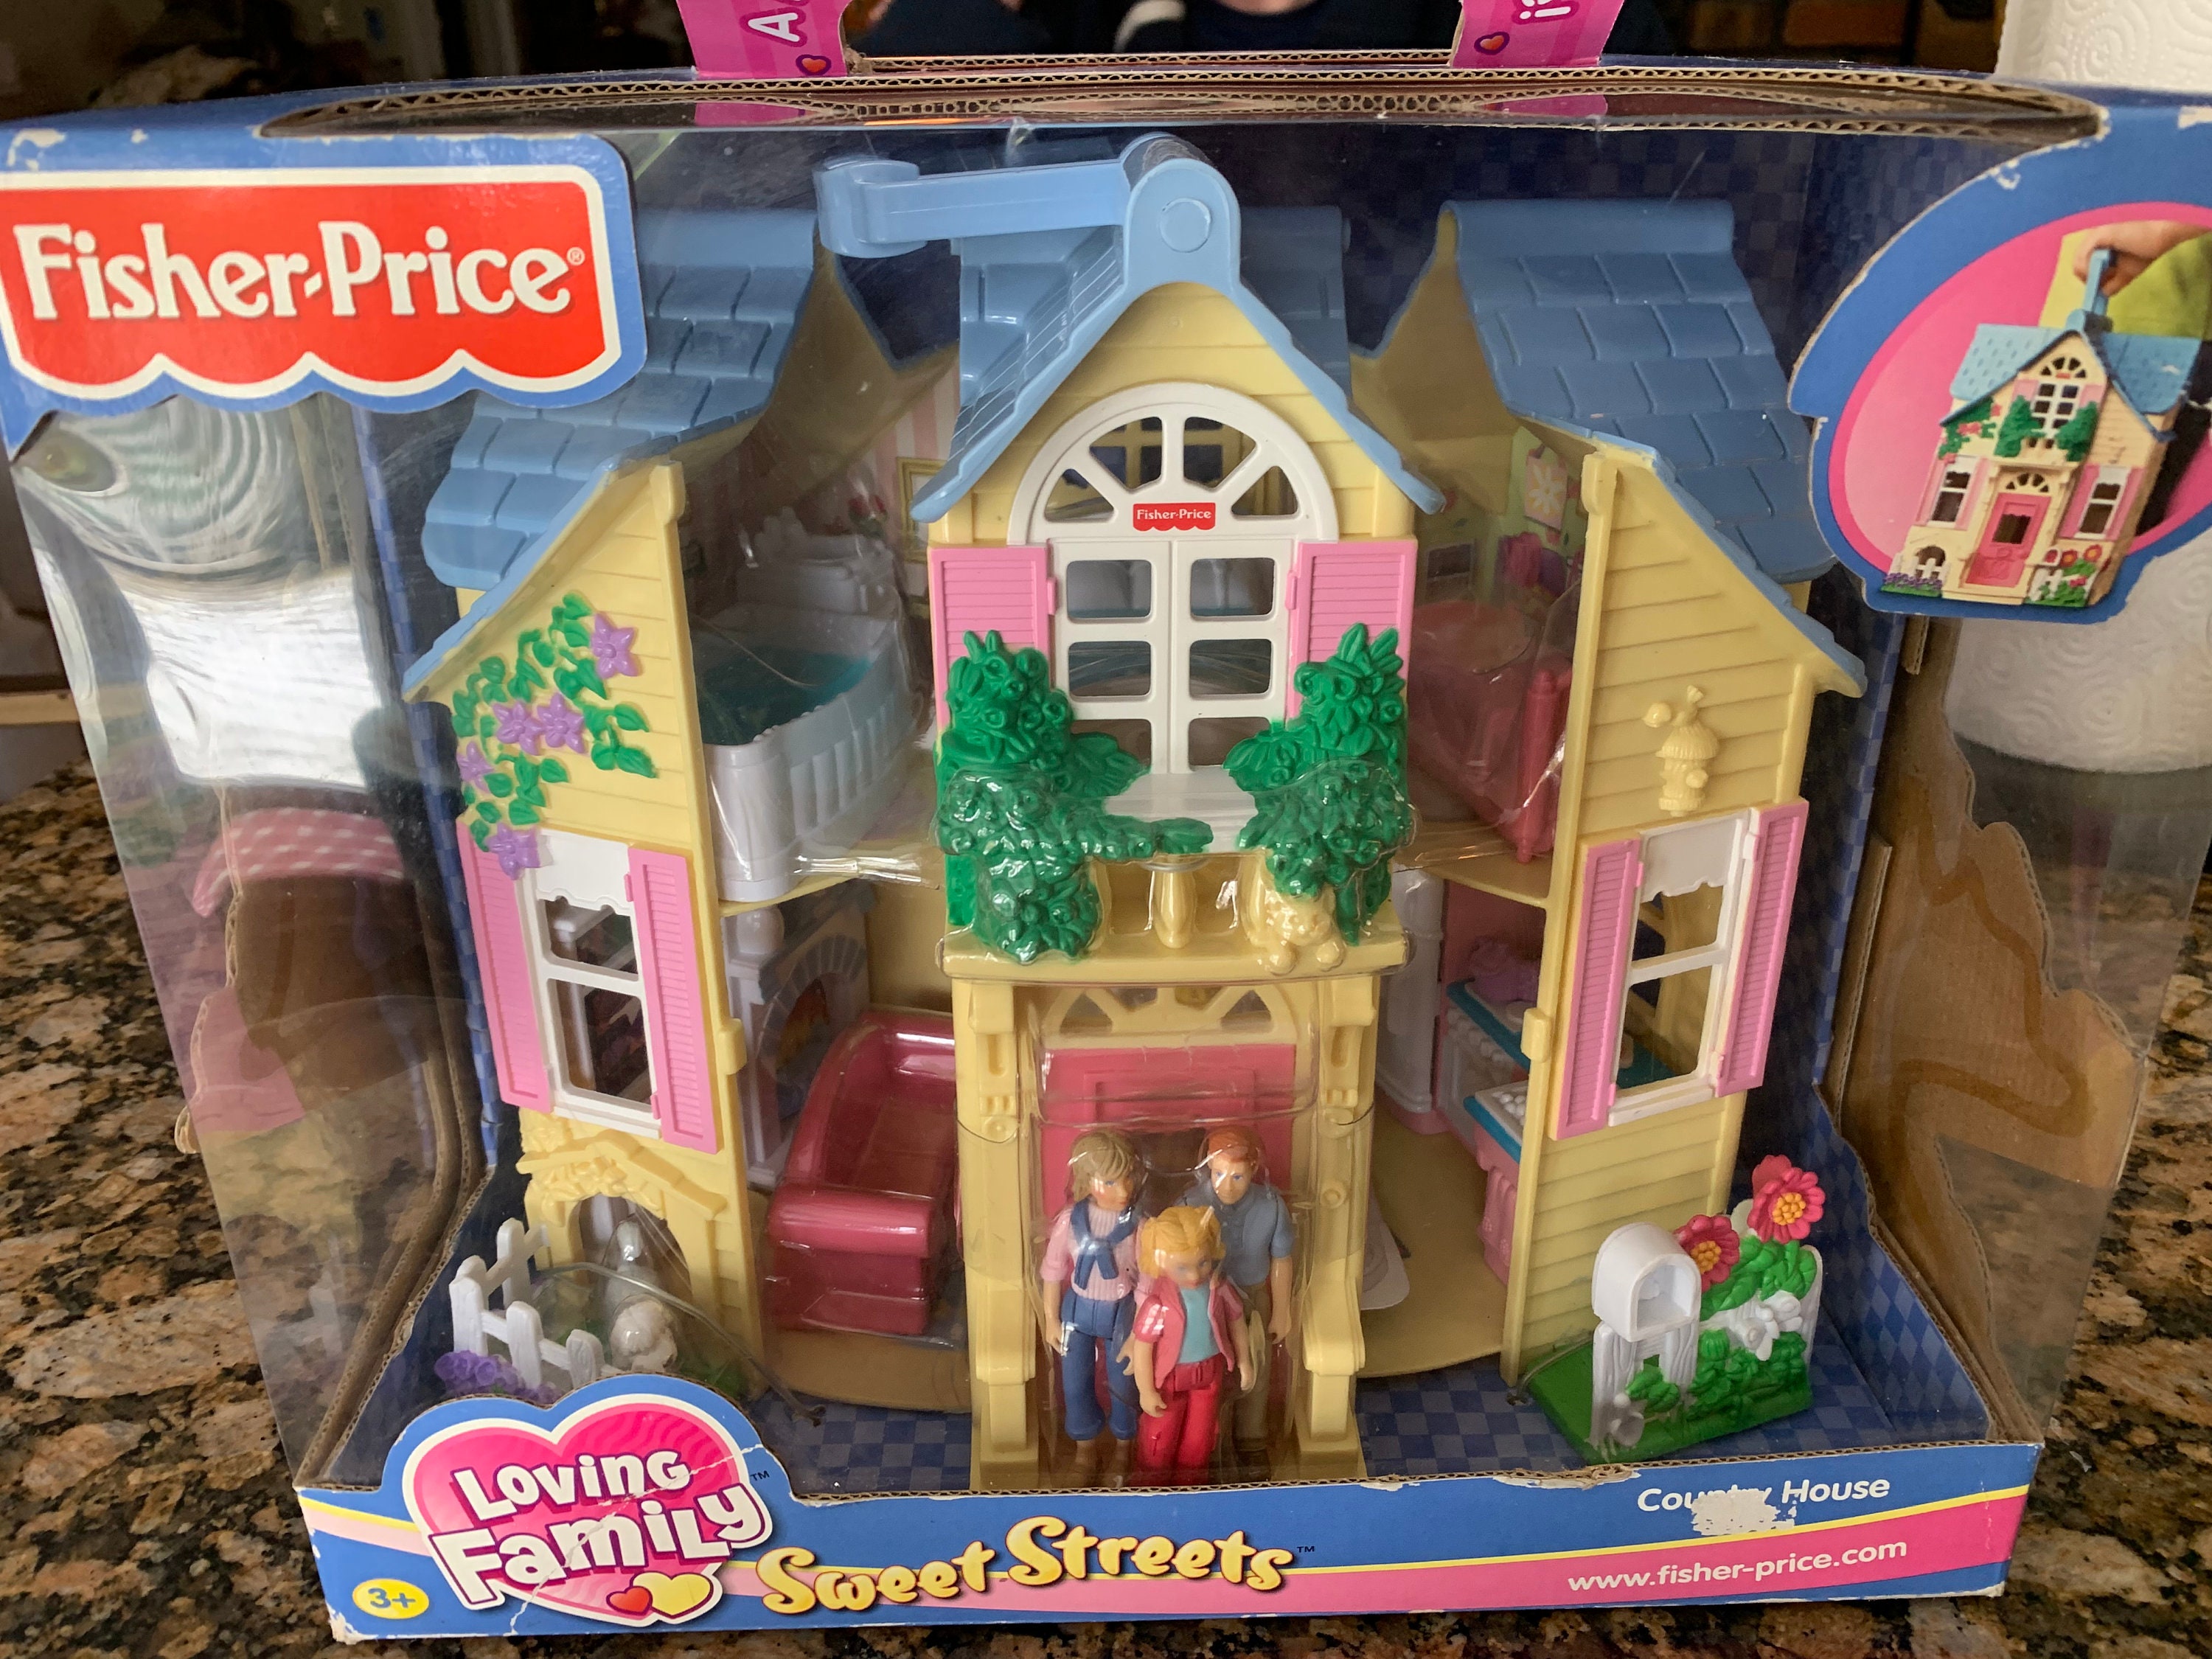 YOU CHOOSE Fisher Price Loving Sweet Streets Furniture & Accessories 